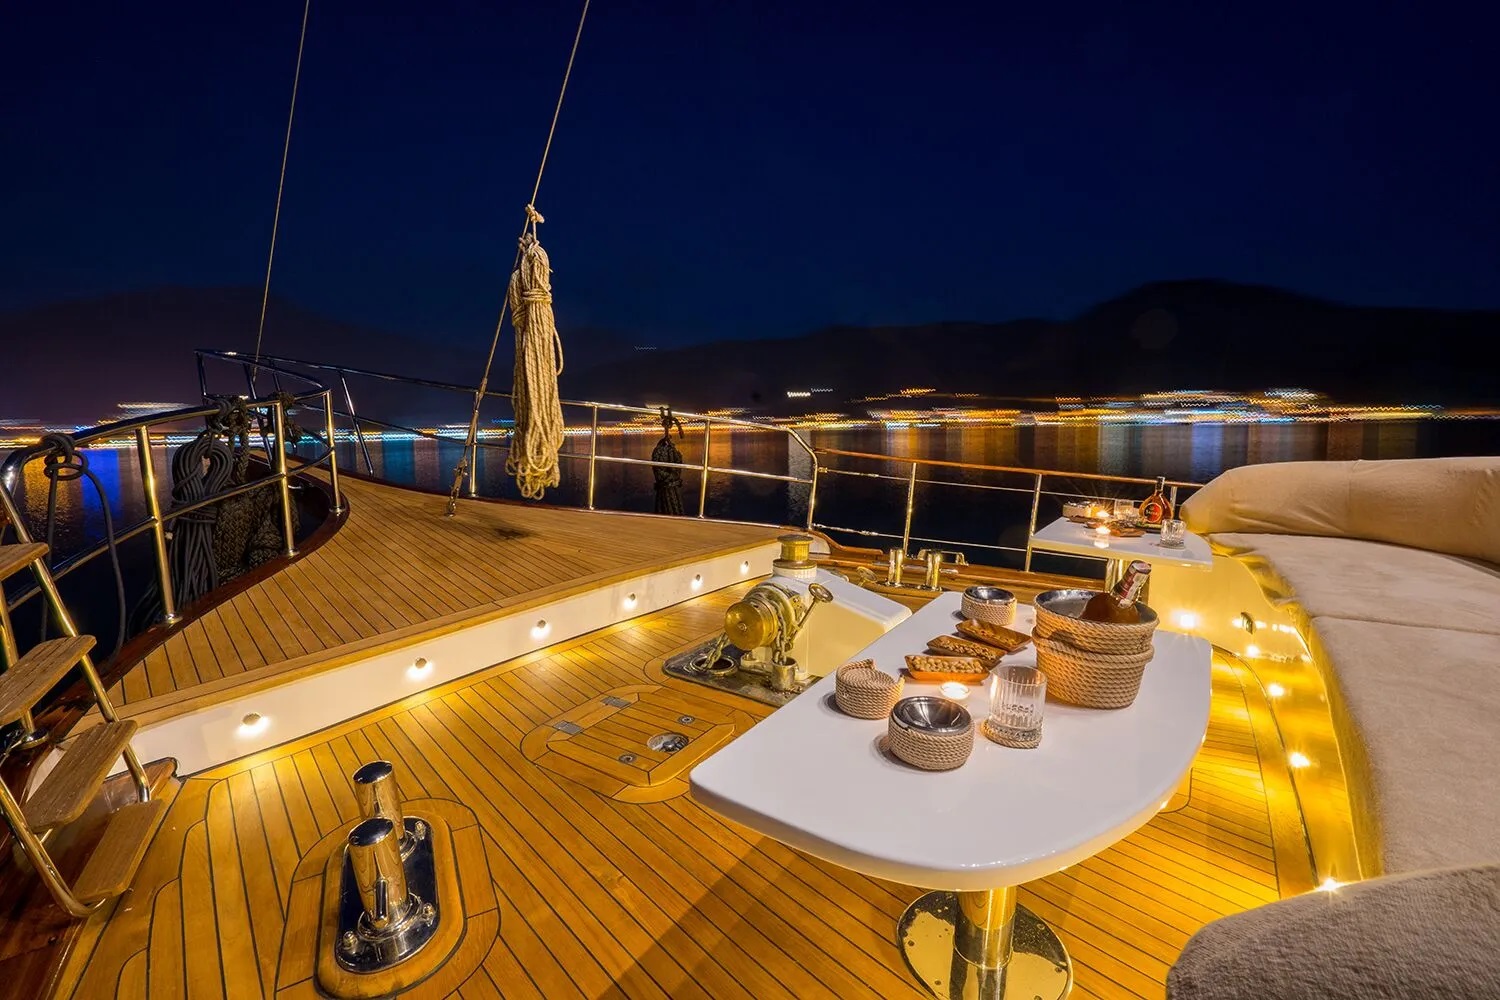 Foredeck Lounge At Night